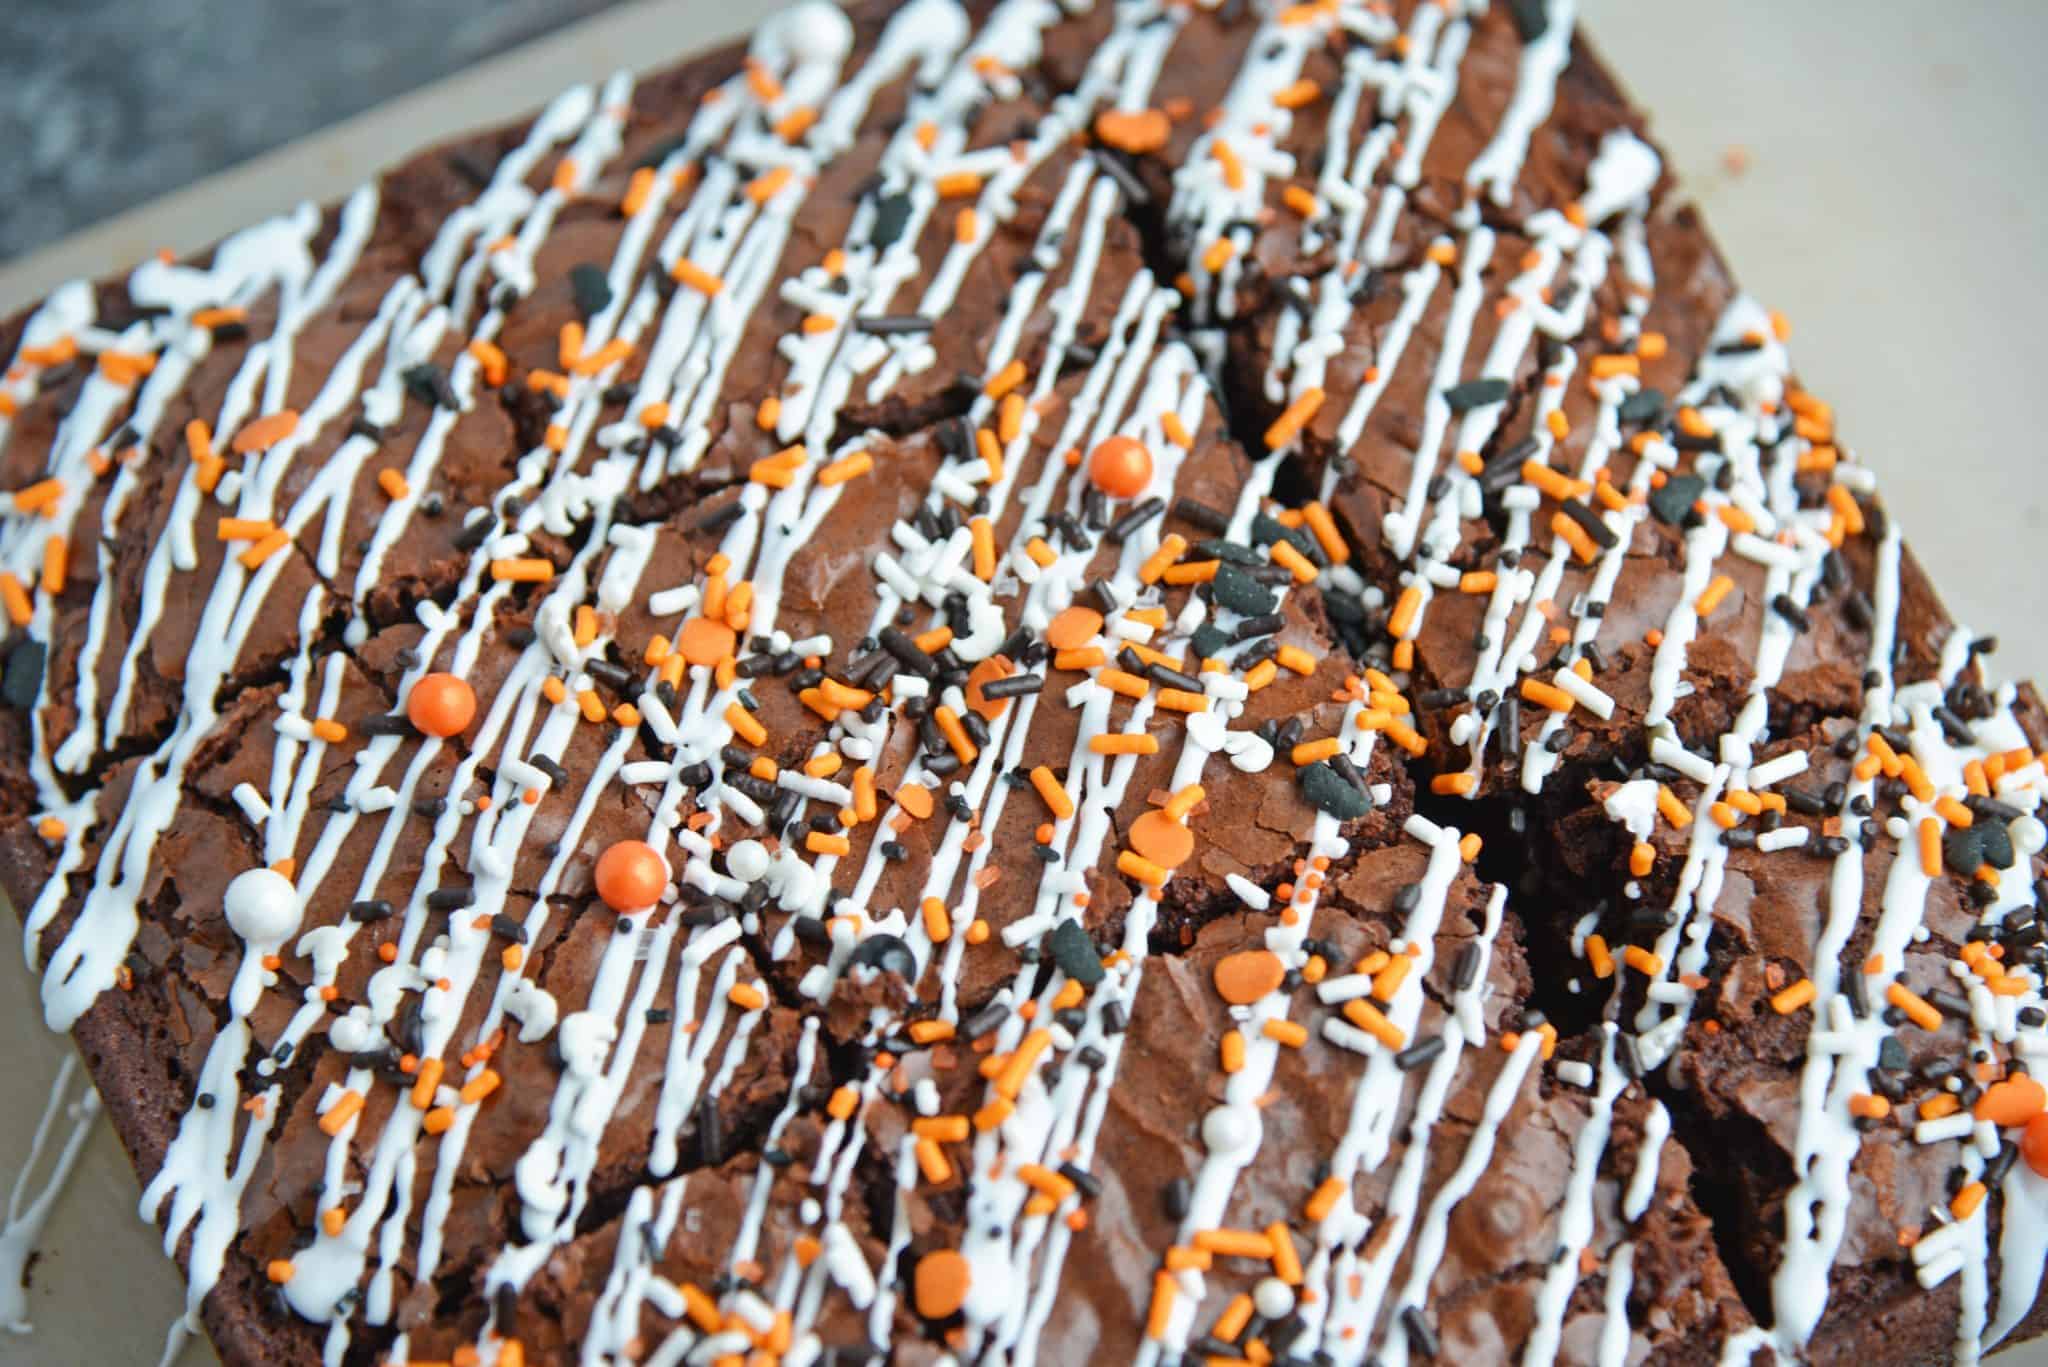 Halloween Brownies are a quick and easy Halloween themed dessert made with box brownie mix, cookie icing and sprinkles. An easy Halloween dessert! #halloweenbrownies #halloweenthemeddesserts #browniemix www.savoryexperiments.com